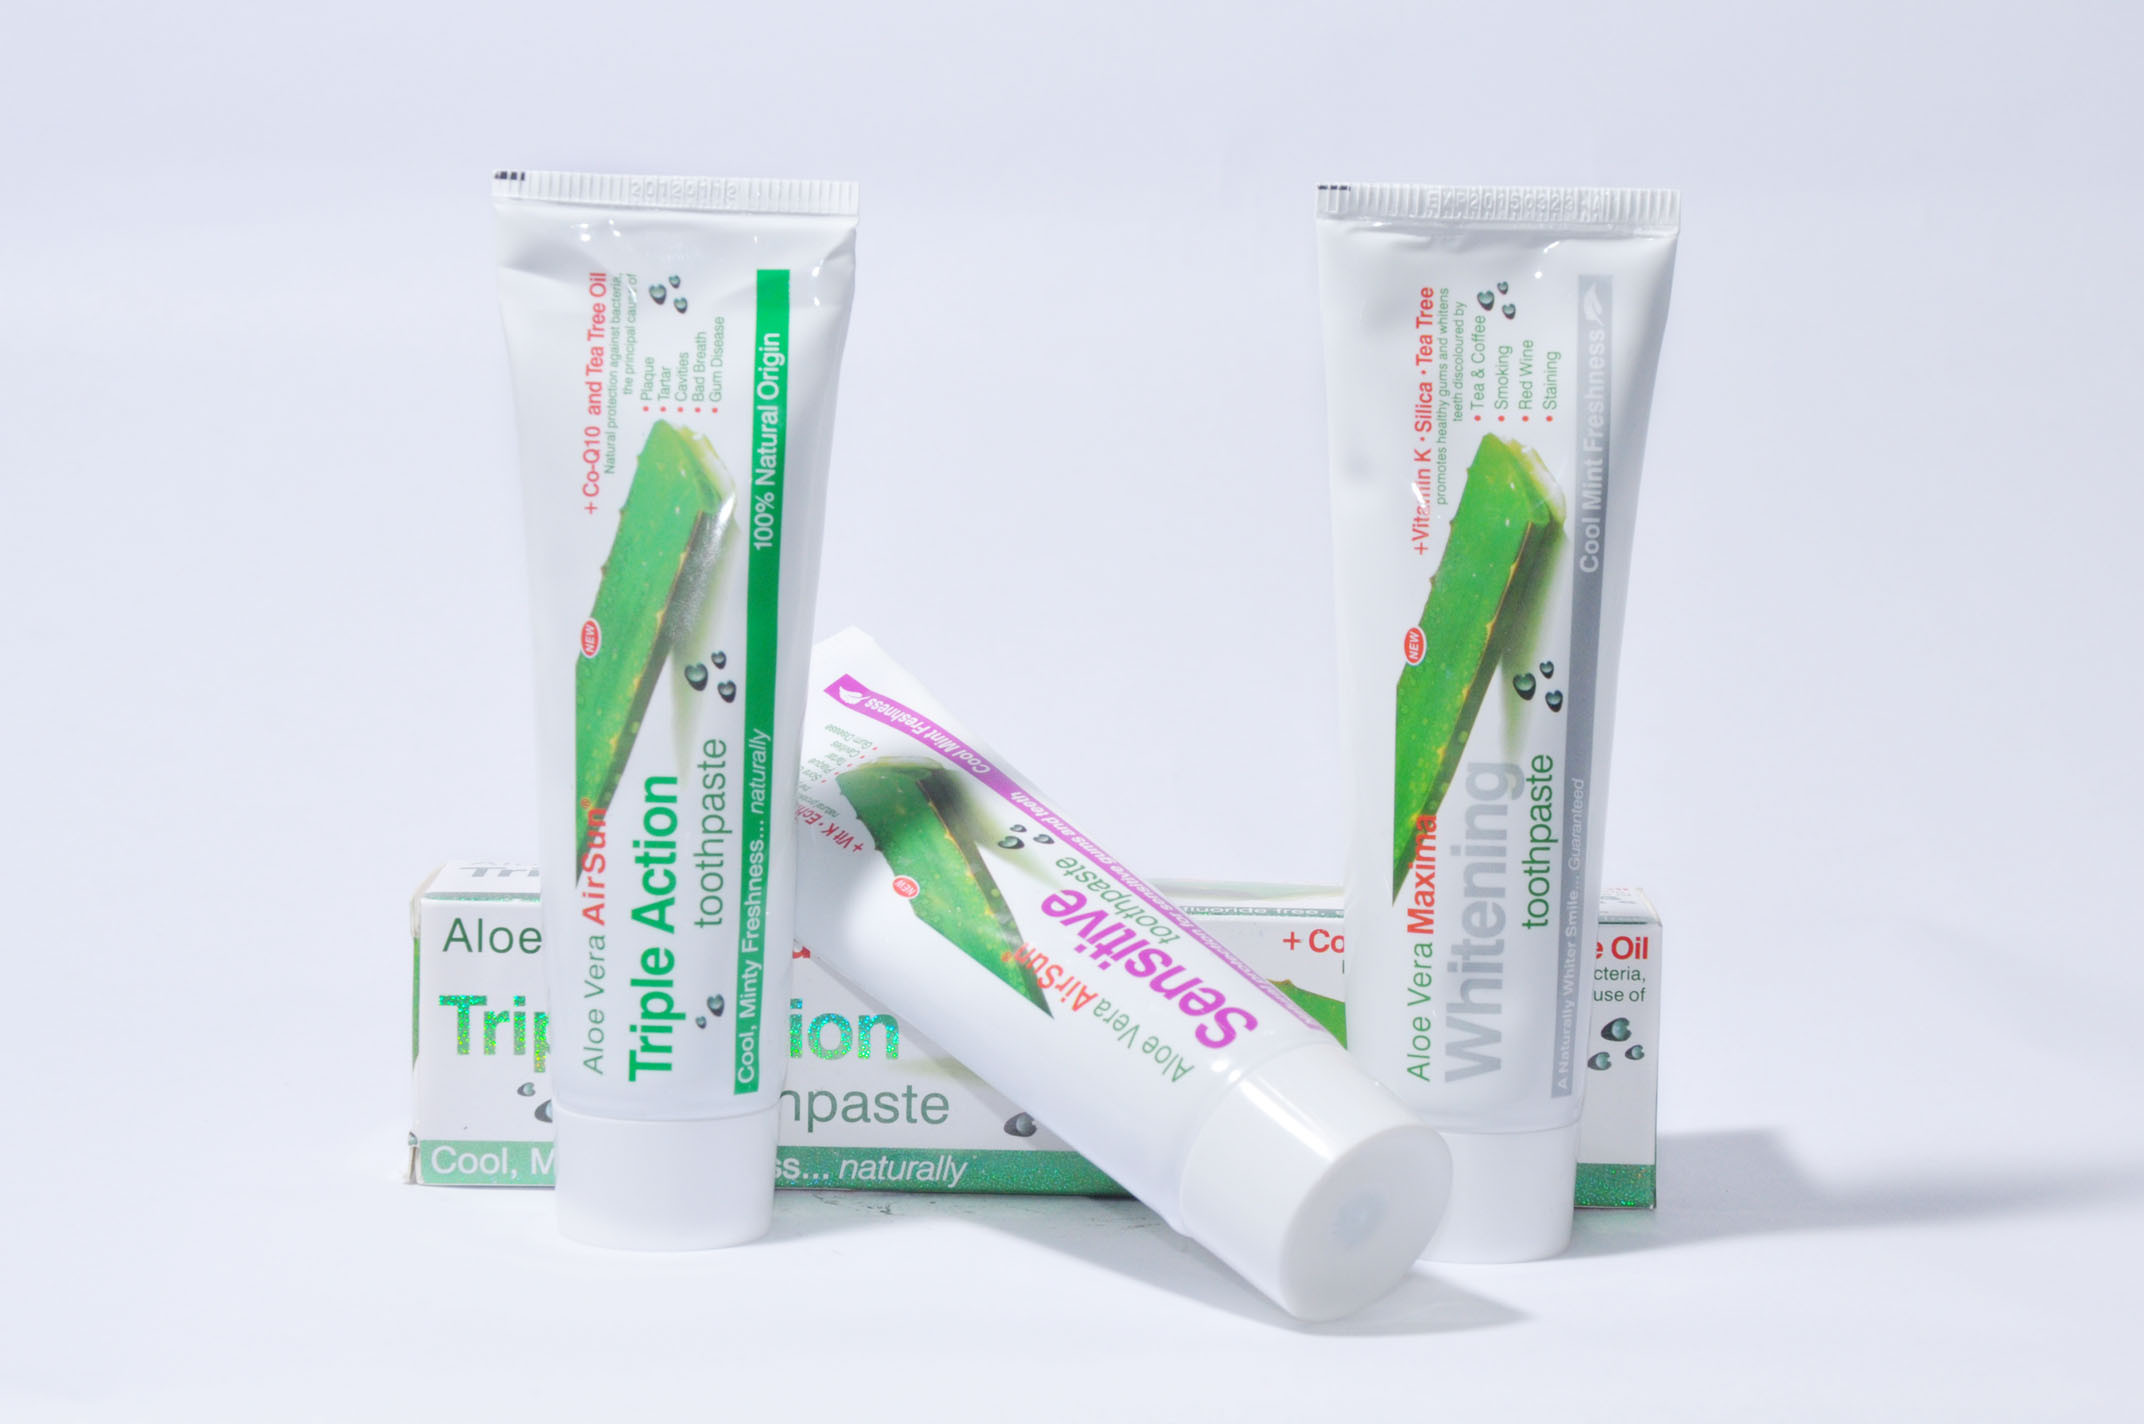 Best Natural Original Triple action Teeth Whitening Toothpaste, cavity protection toothpastes wholesale